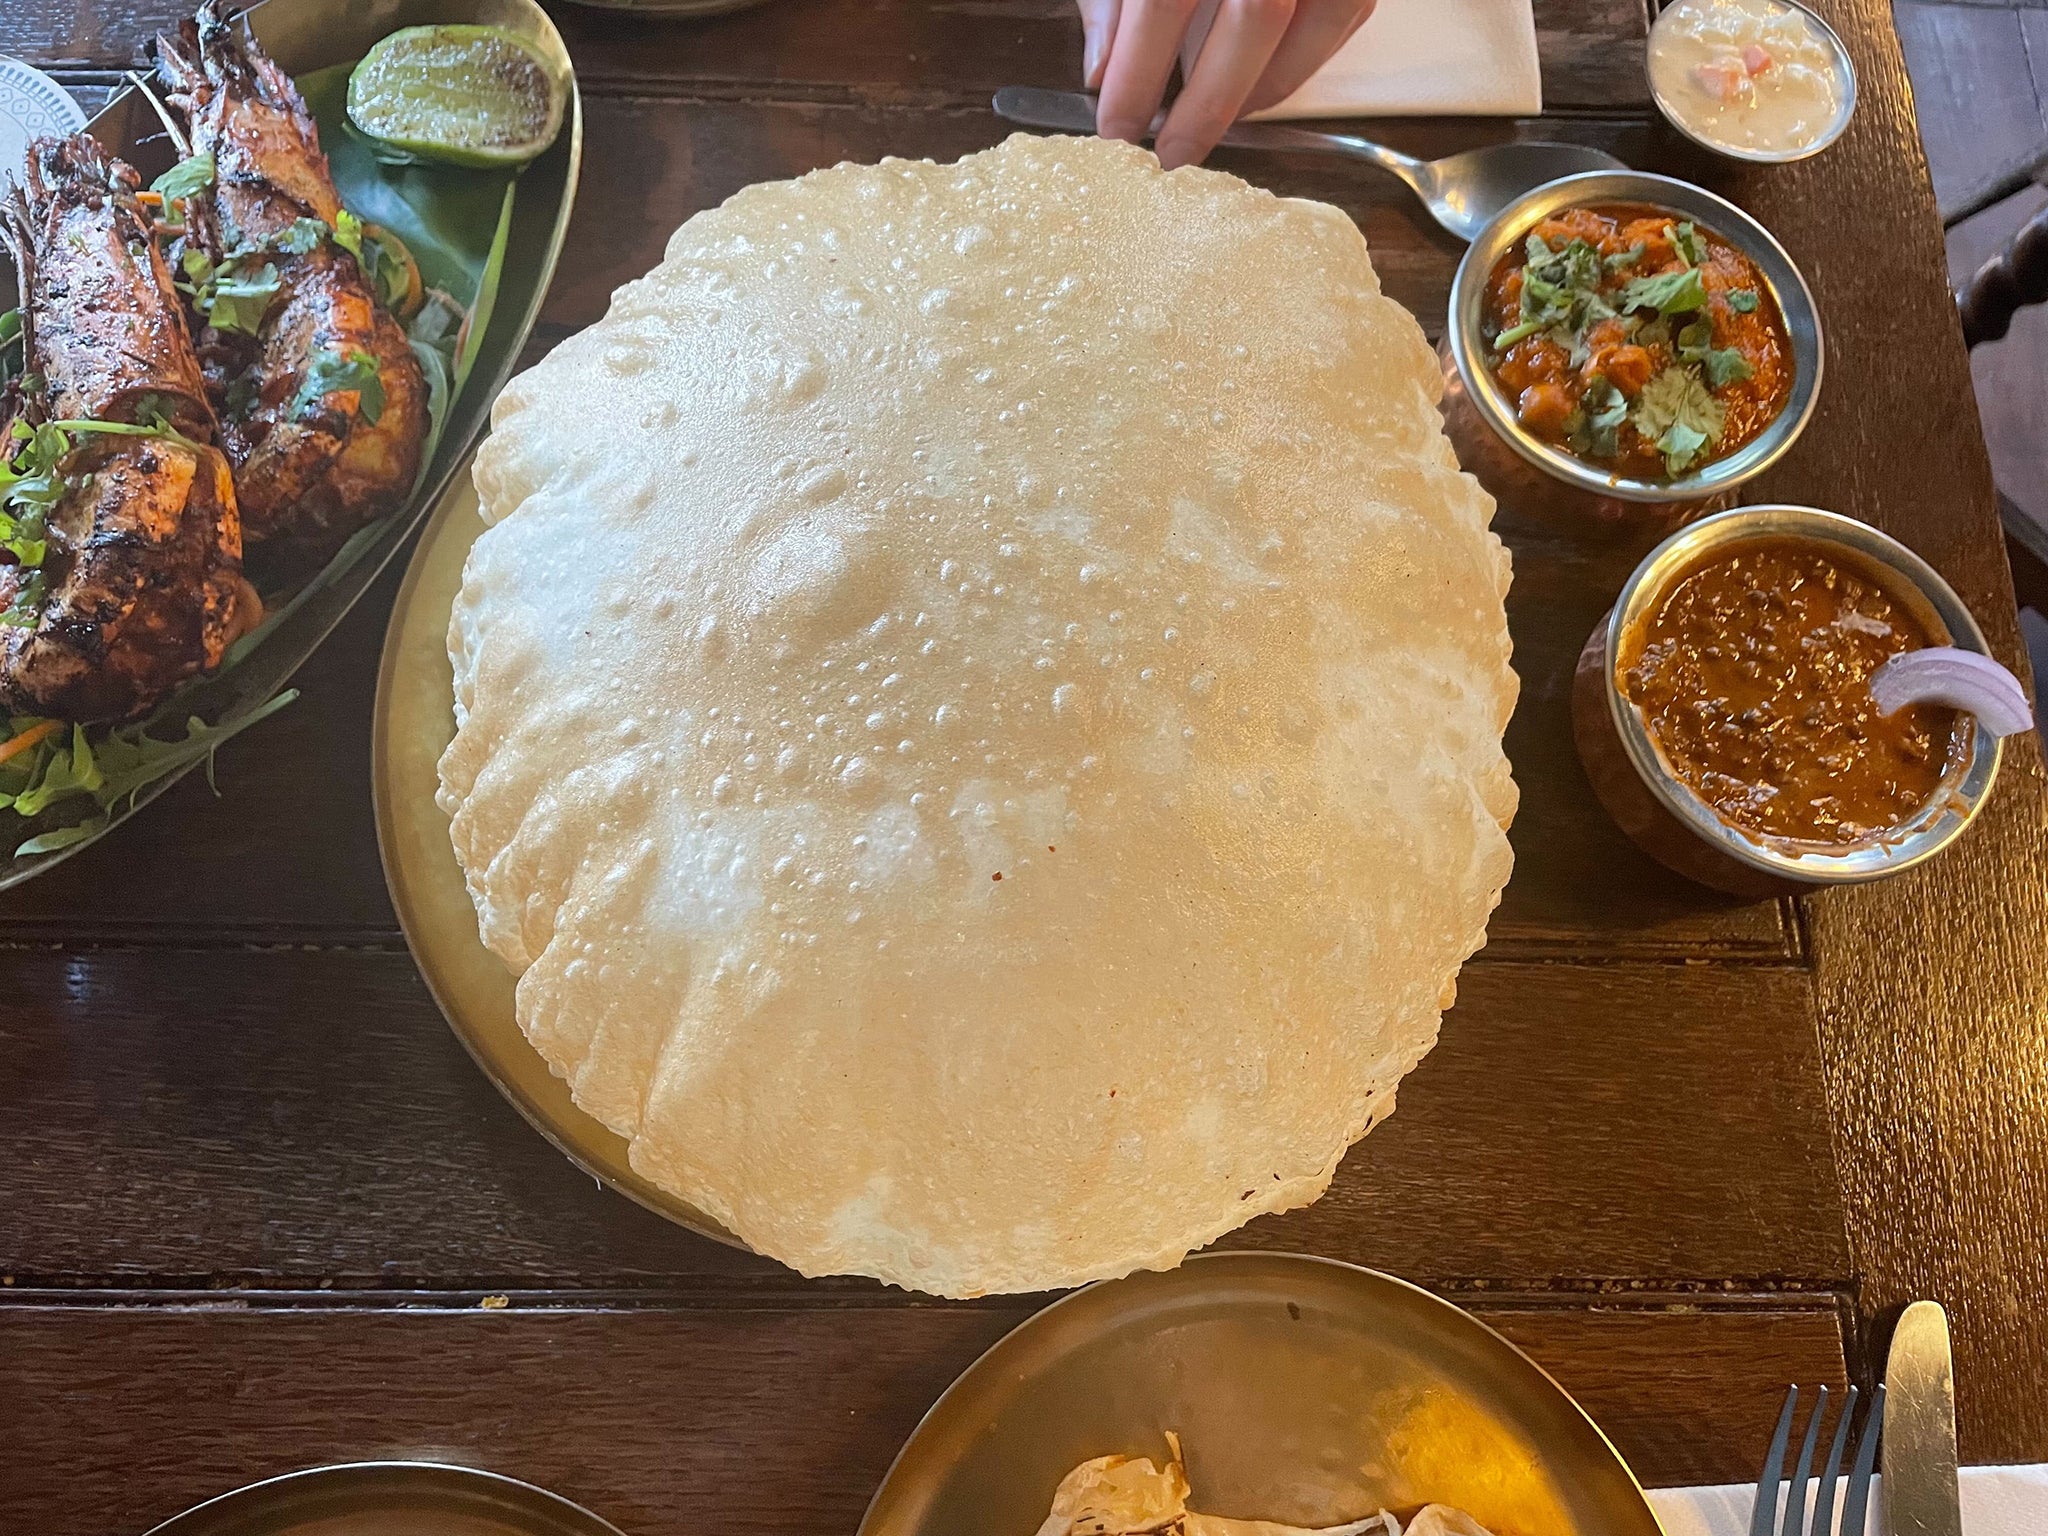 Thhe channa bhatura, a type of puffed up fried bread